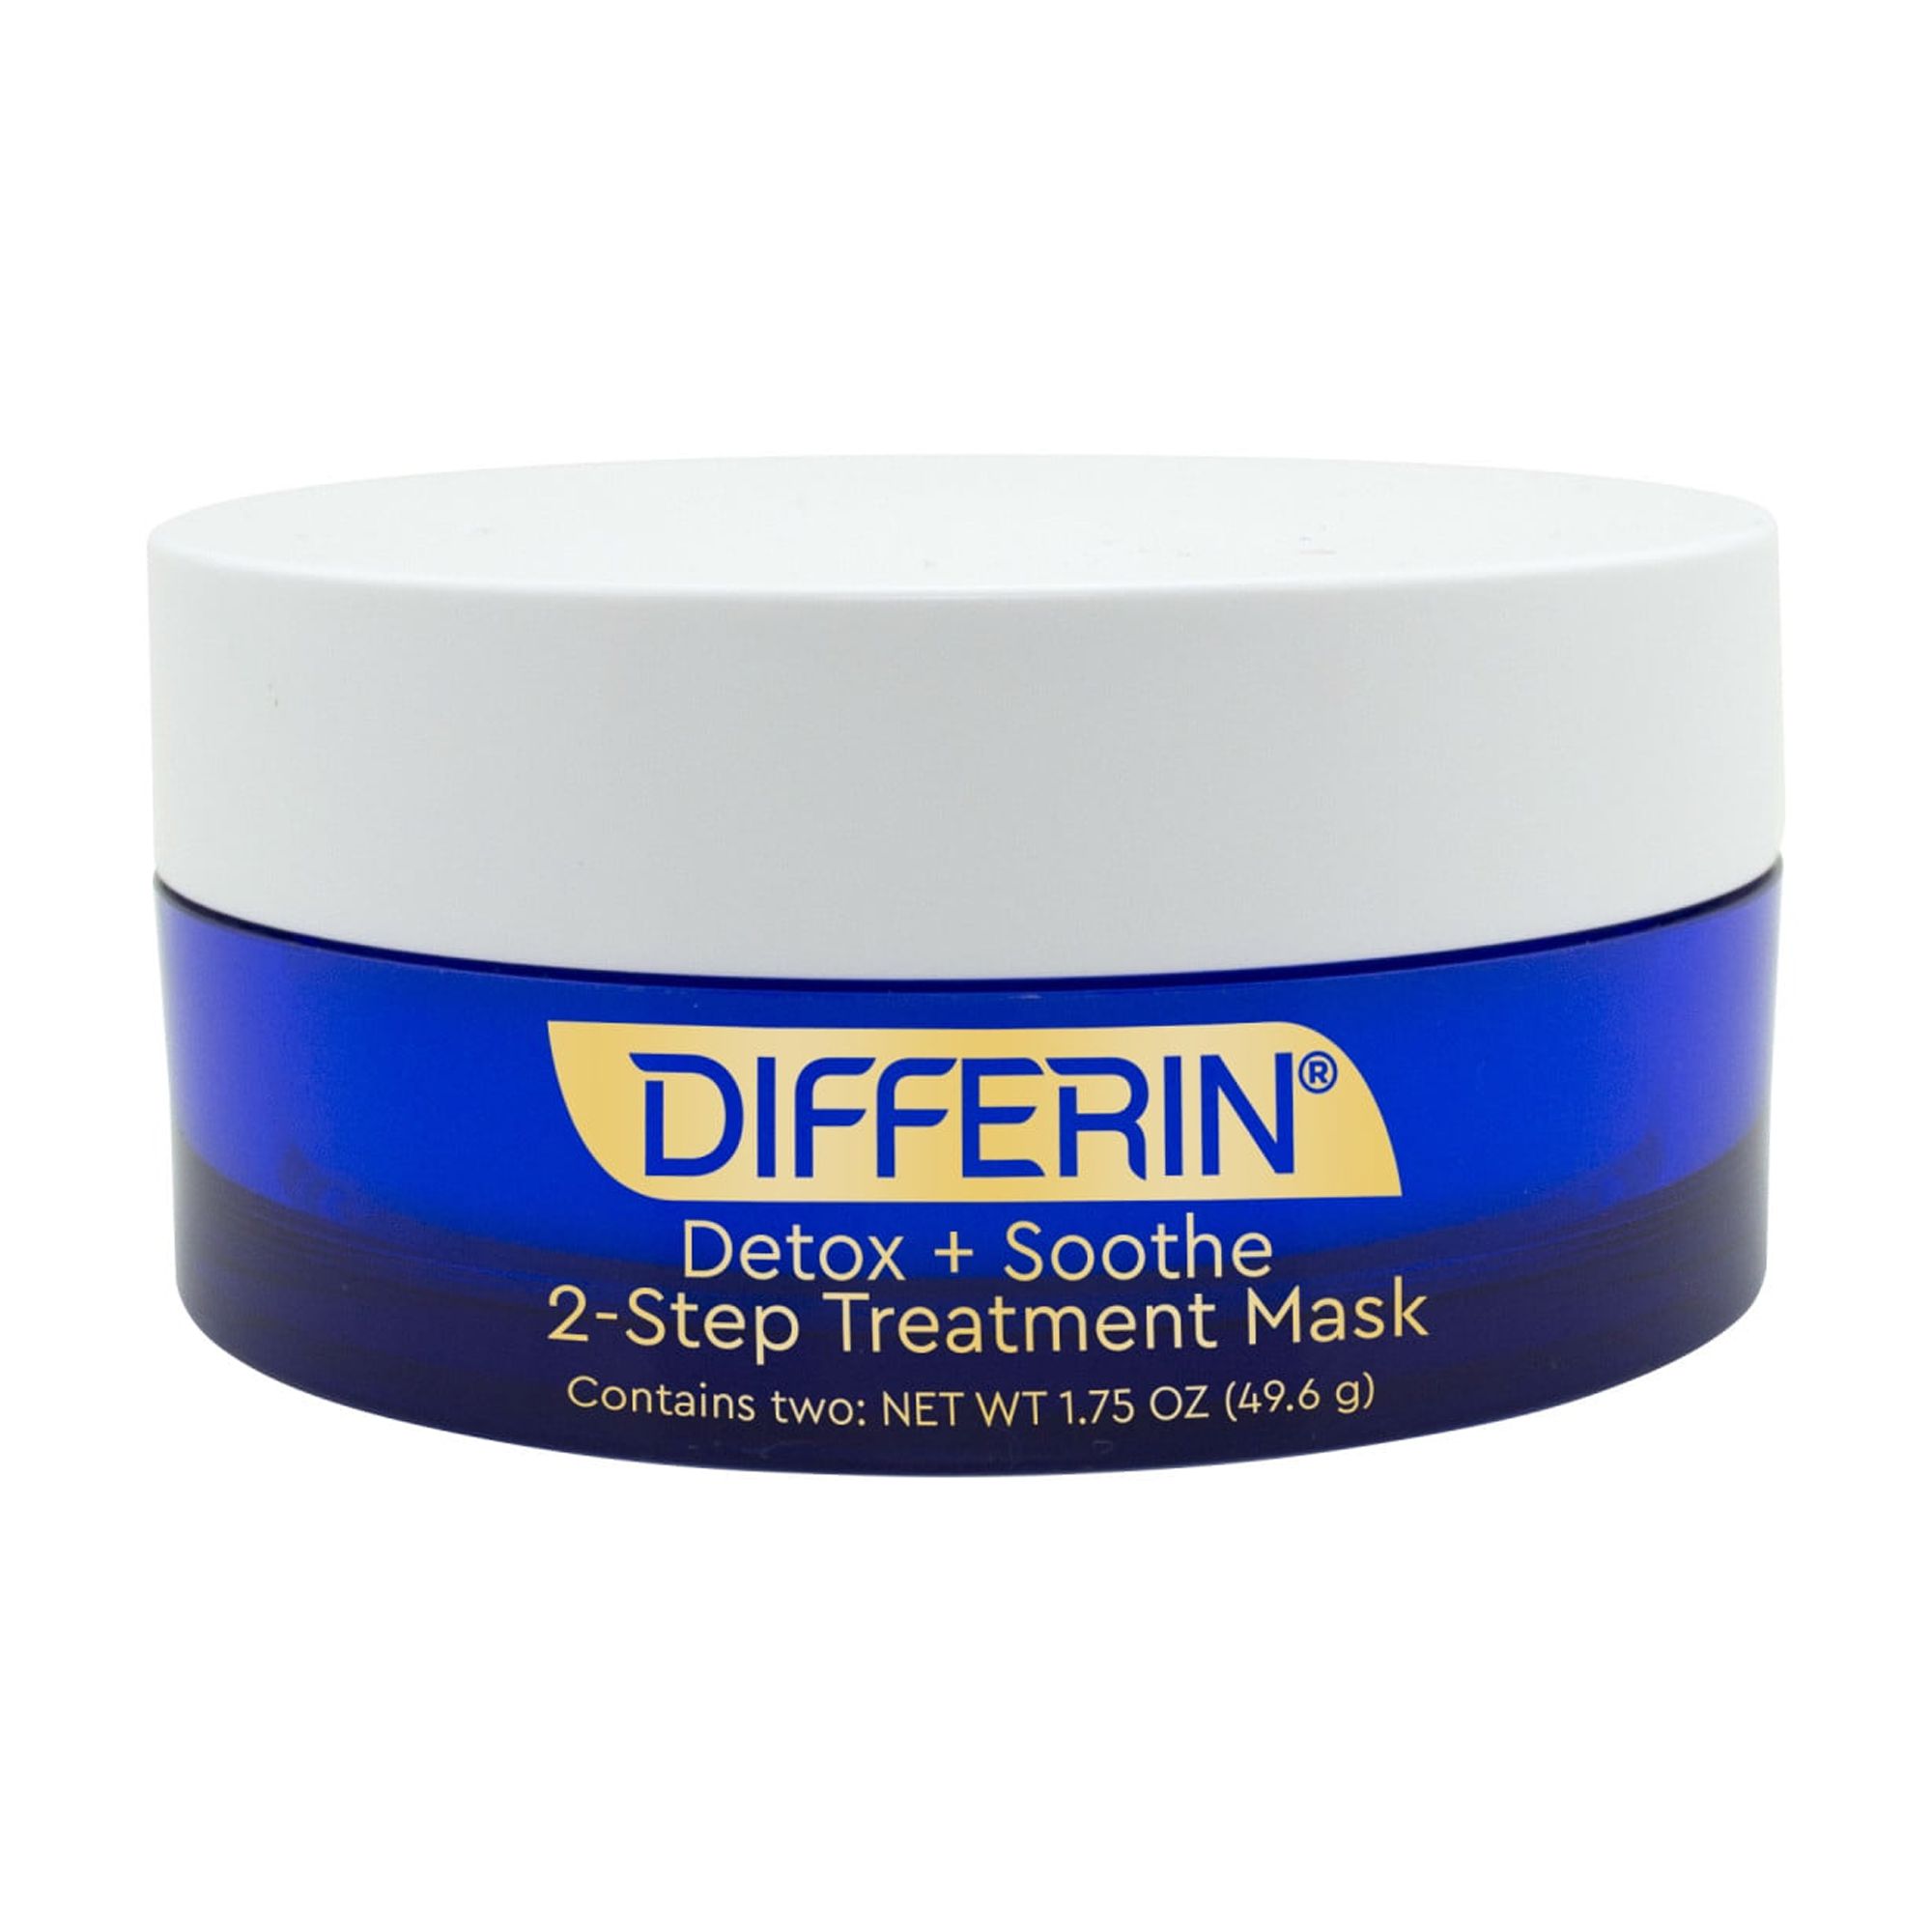 Differin Detox + Soothe 2-Step Treatment Clay Face Mask, 1.75 oz - image 1 of 9